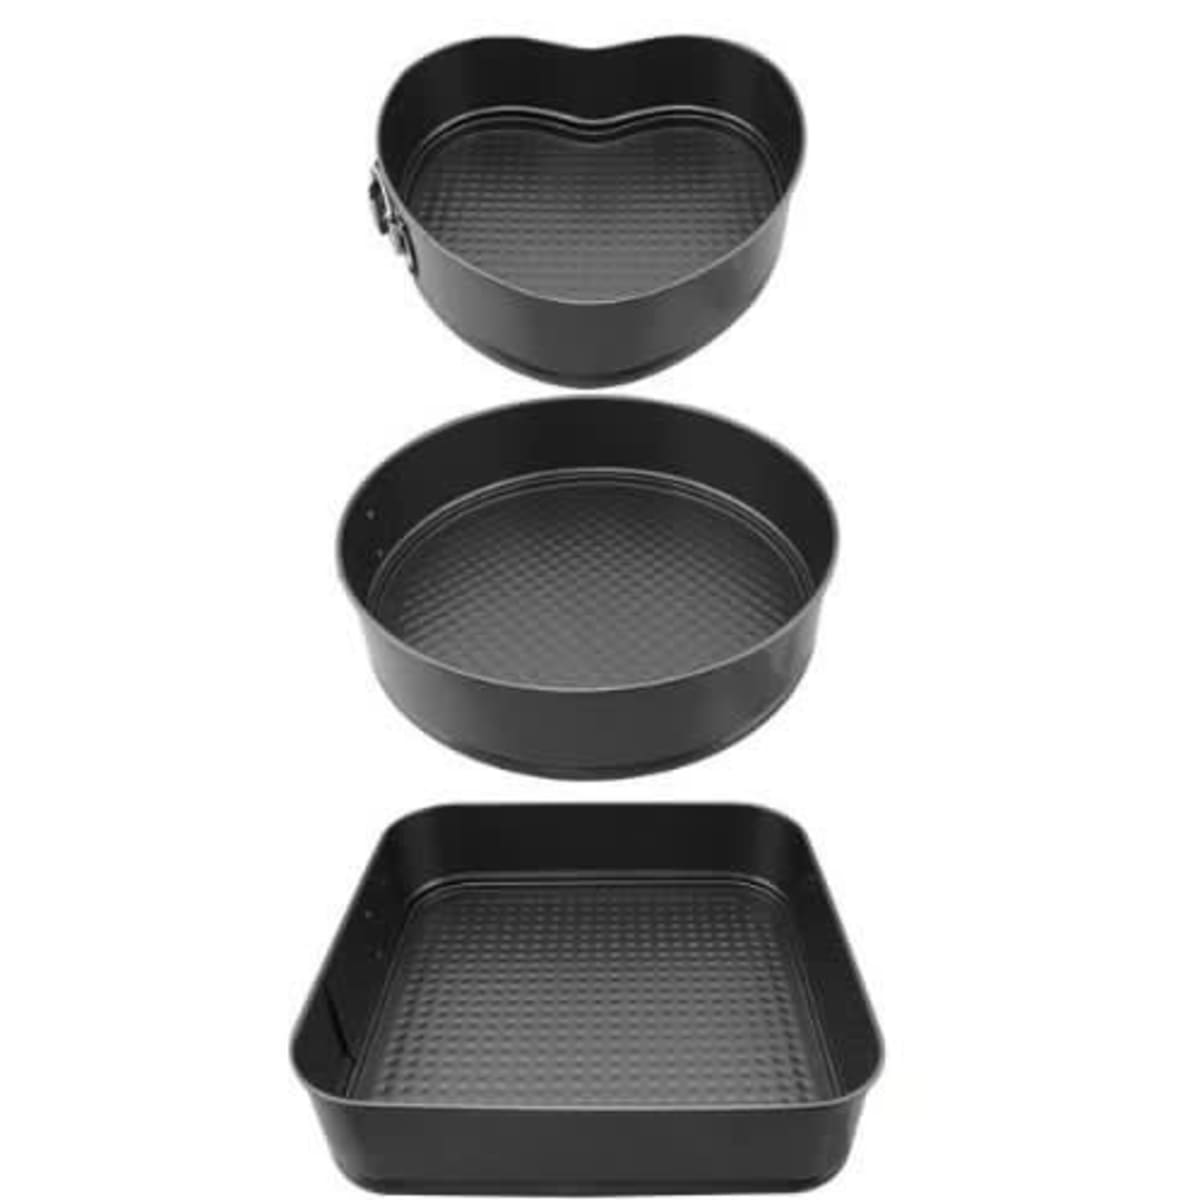 Non-stick Silicone Rectangle Cake Pan Tins Baking Mould-Bakeware Tray Bread  Tray Tools Bakeware Flexible Silicone Cake - buy Non-stick Silicone Rectangle  Cake Pan Tins Baking Mould-Bakeware Tray Bread Tray Tools Bakeware Flexible